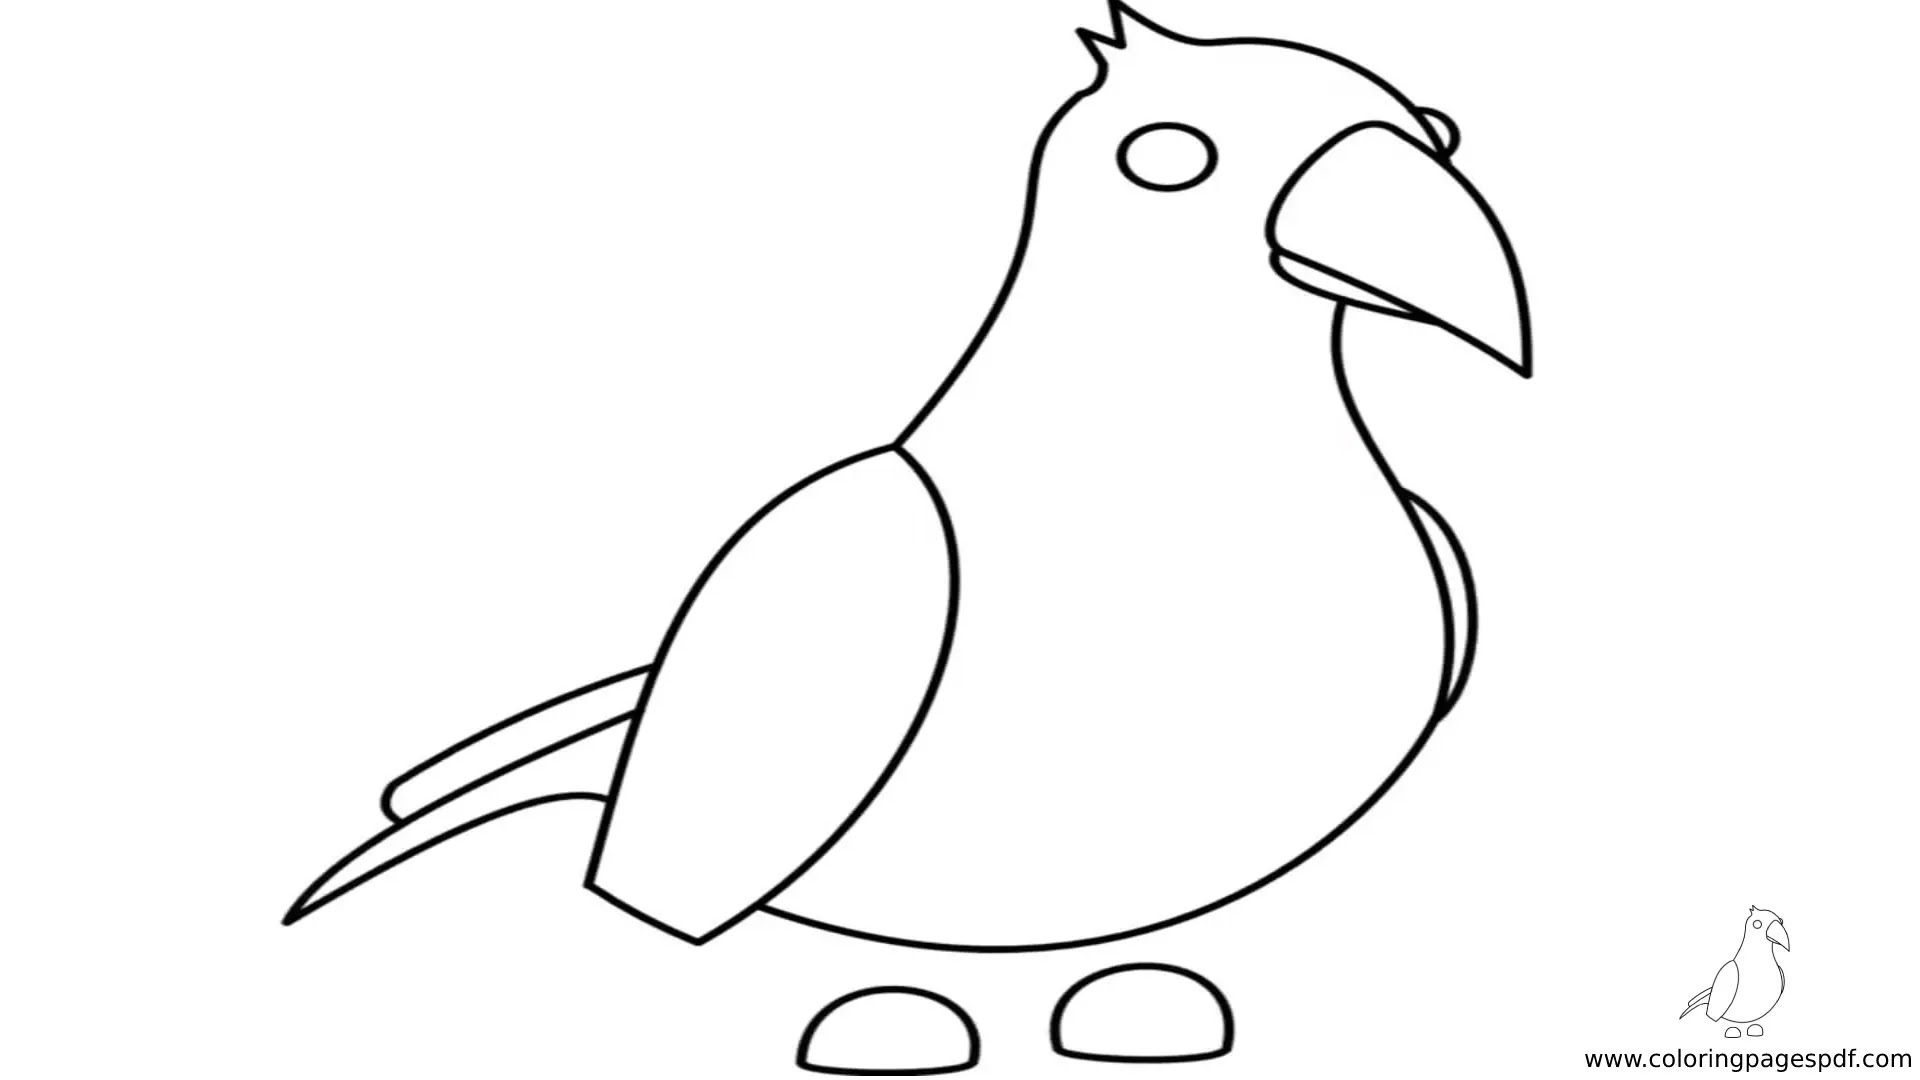 Adopt Me Coloring Pages Parrot